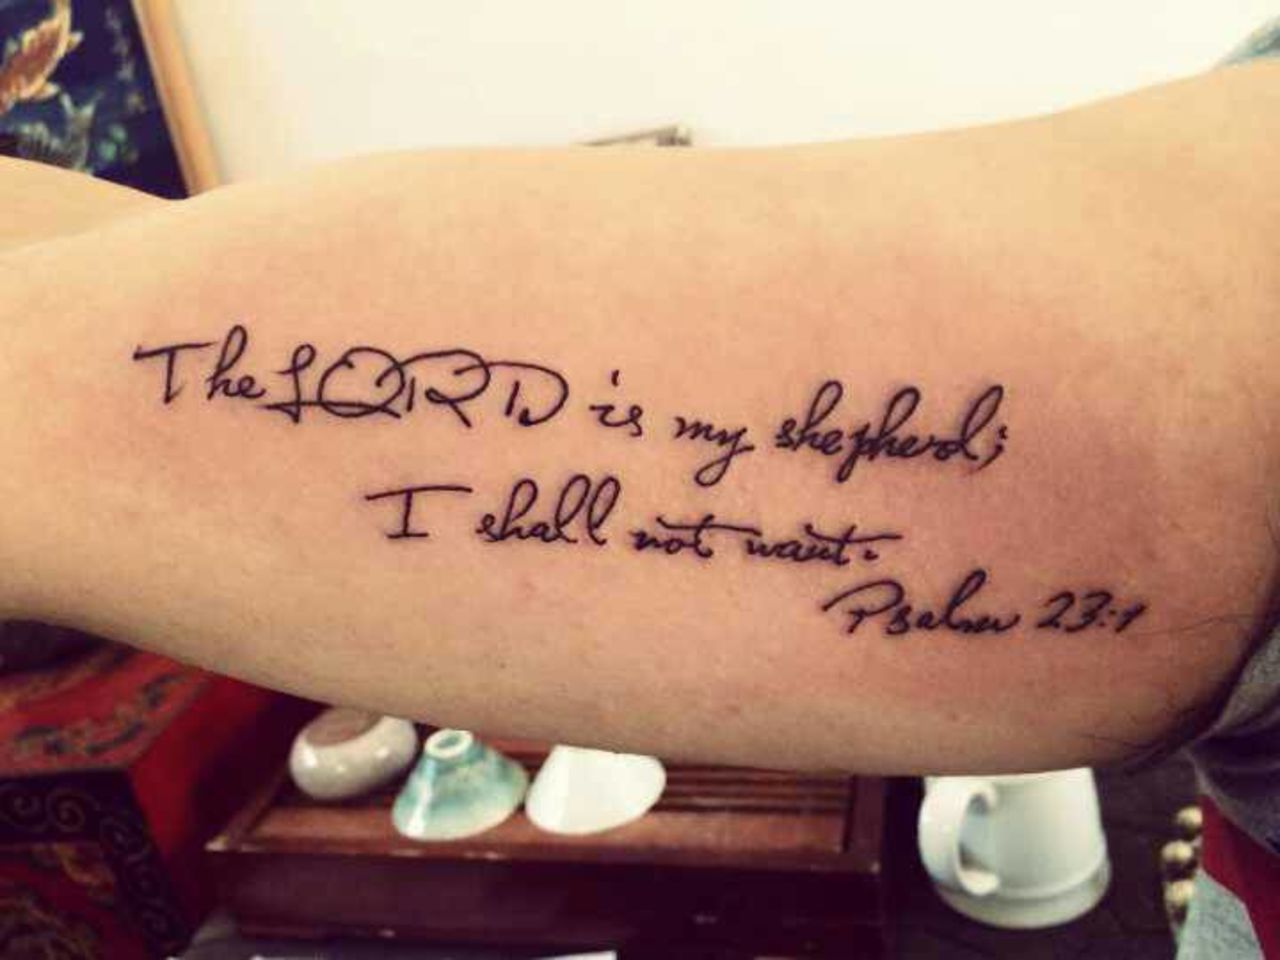 An example of Da Hua's work depicting a quote from the Bible. "The Lord is my shepherd; I shall not want." Psalm 23:1. 